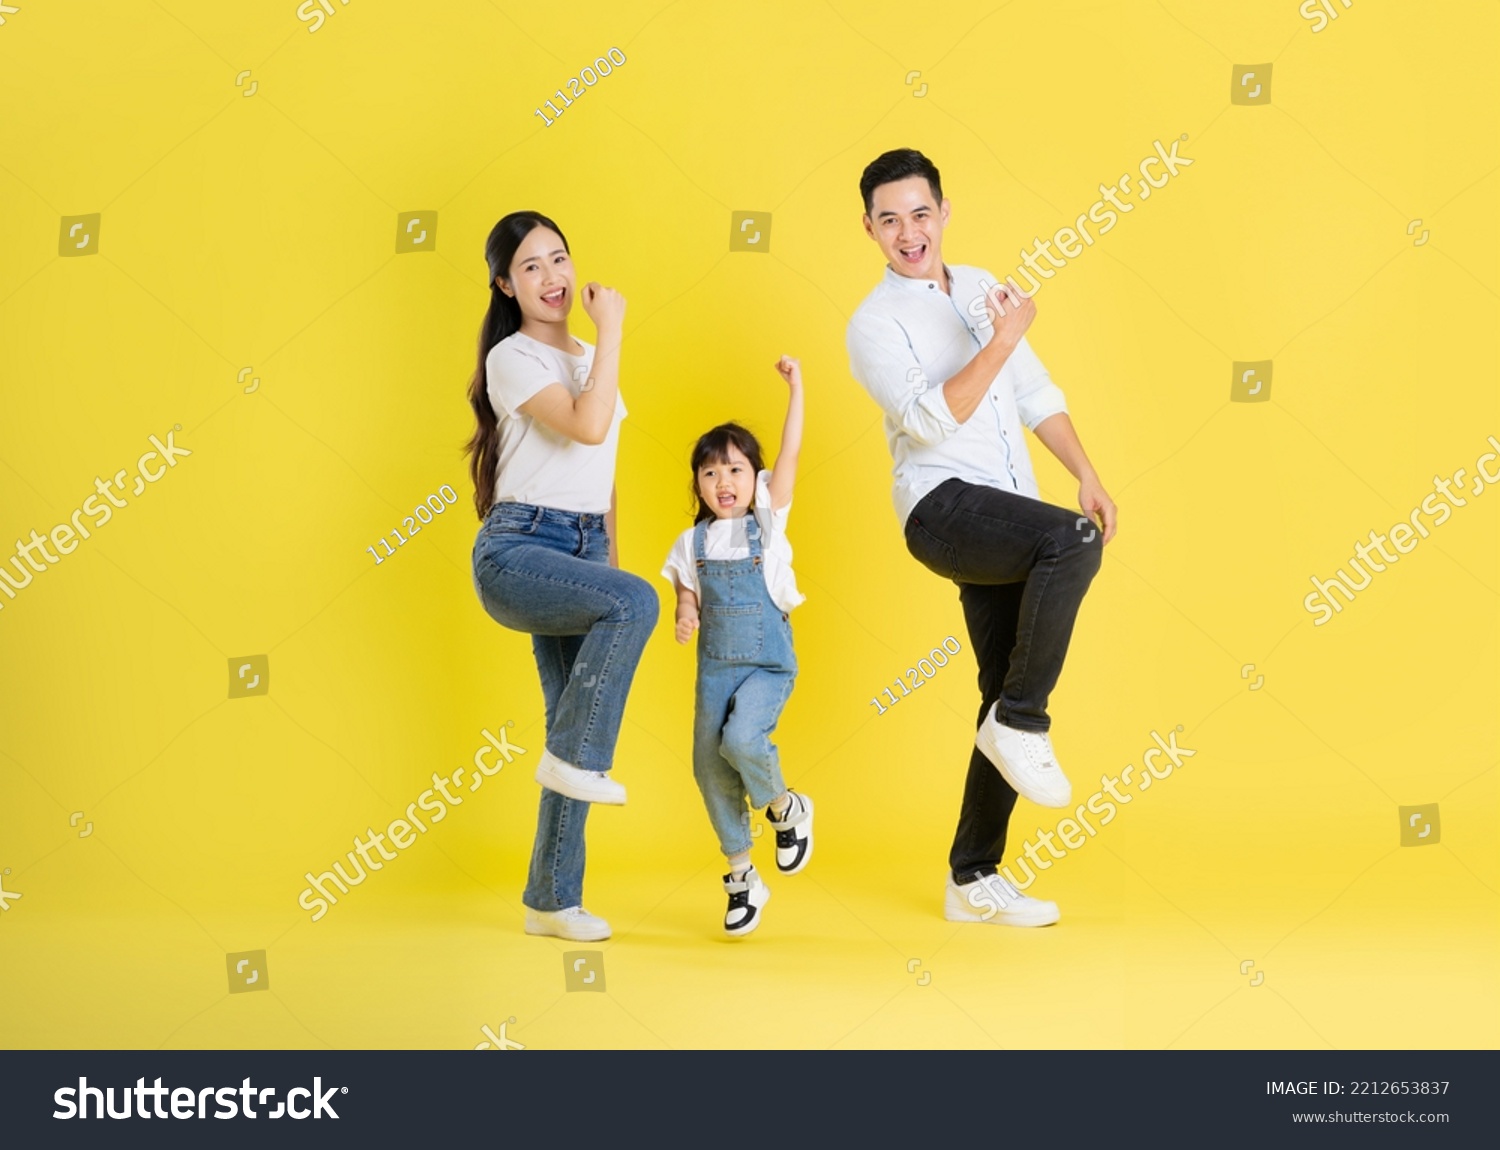 happy asian family image, isolated on yellow background #2212653837